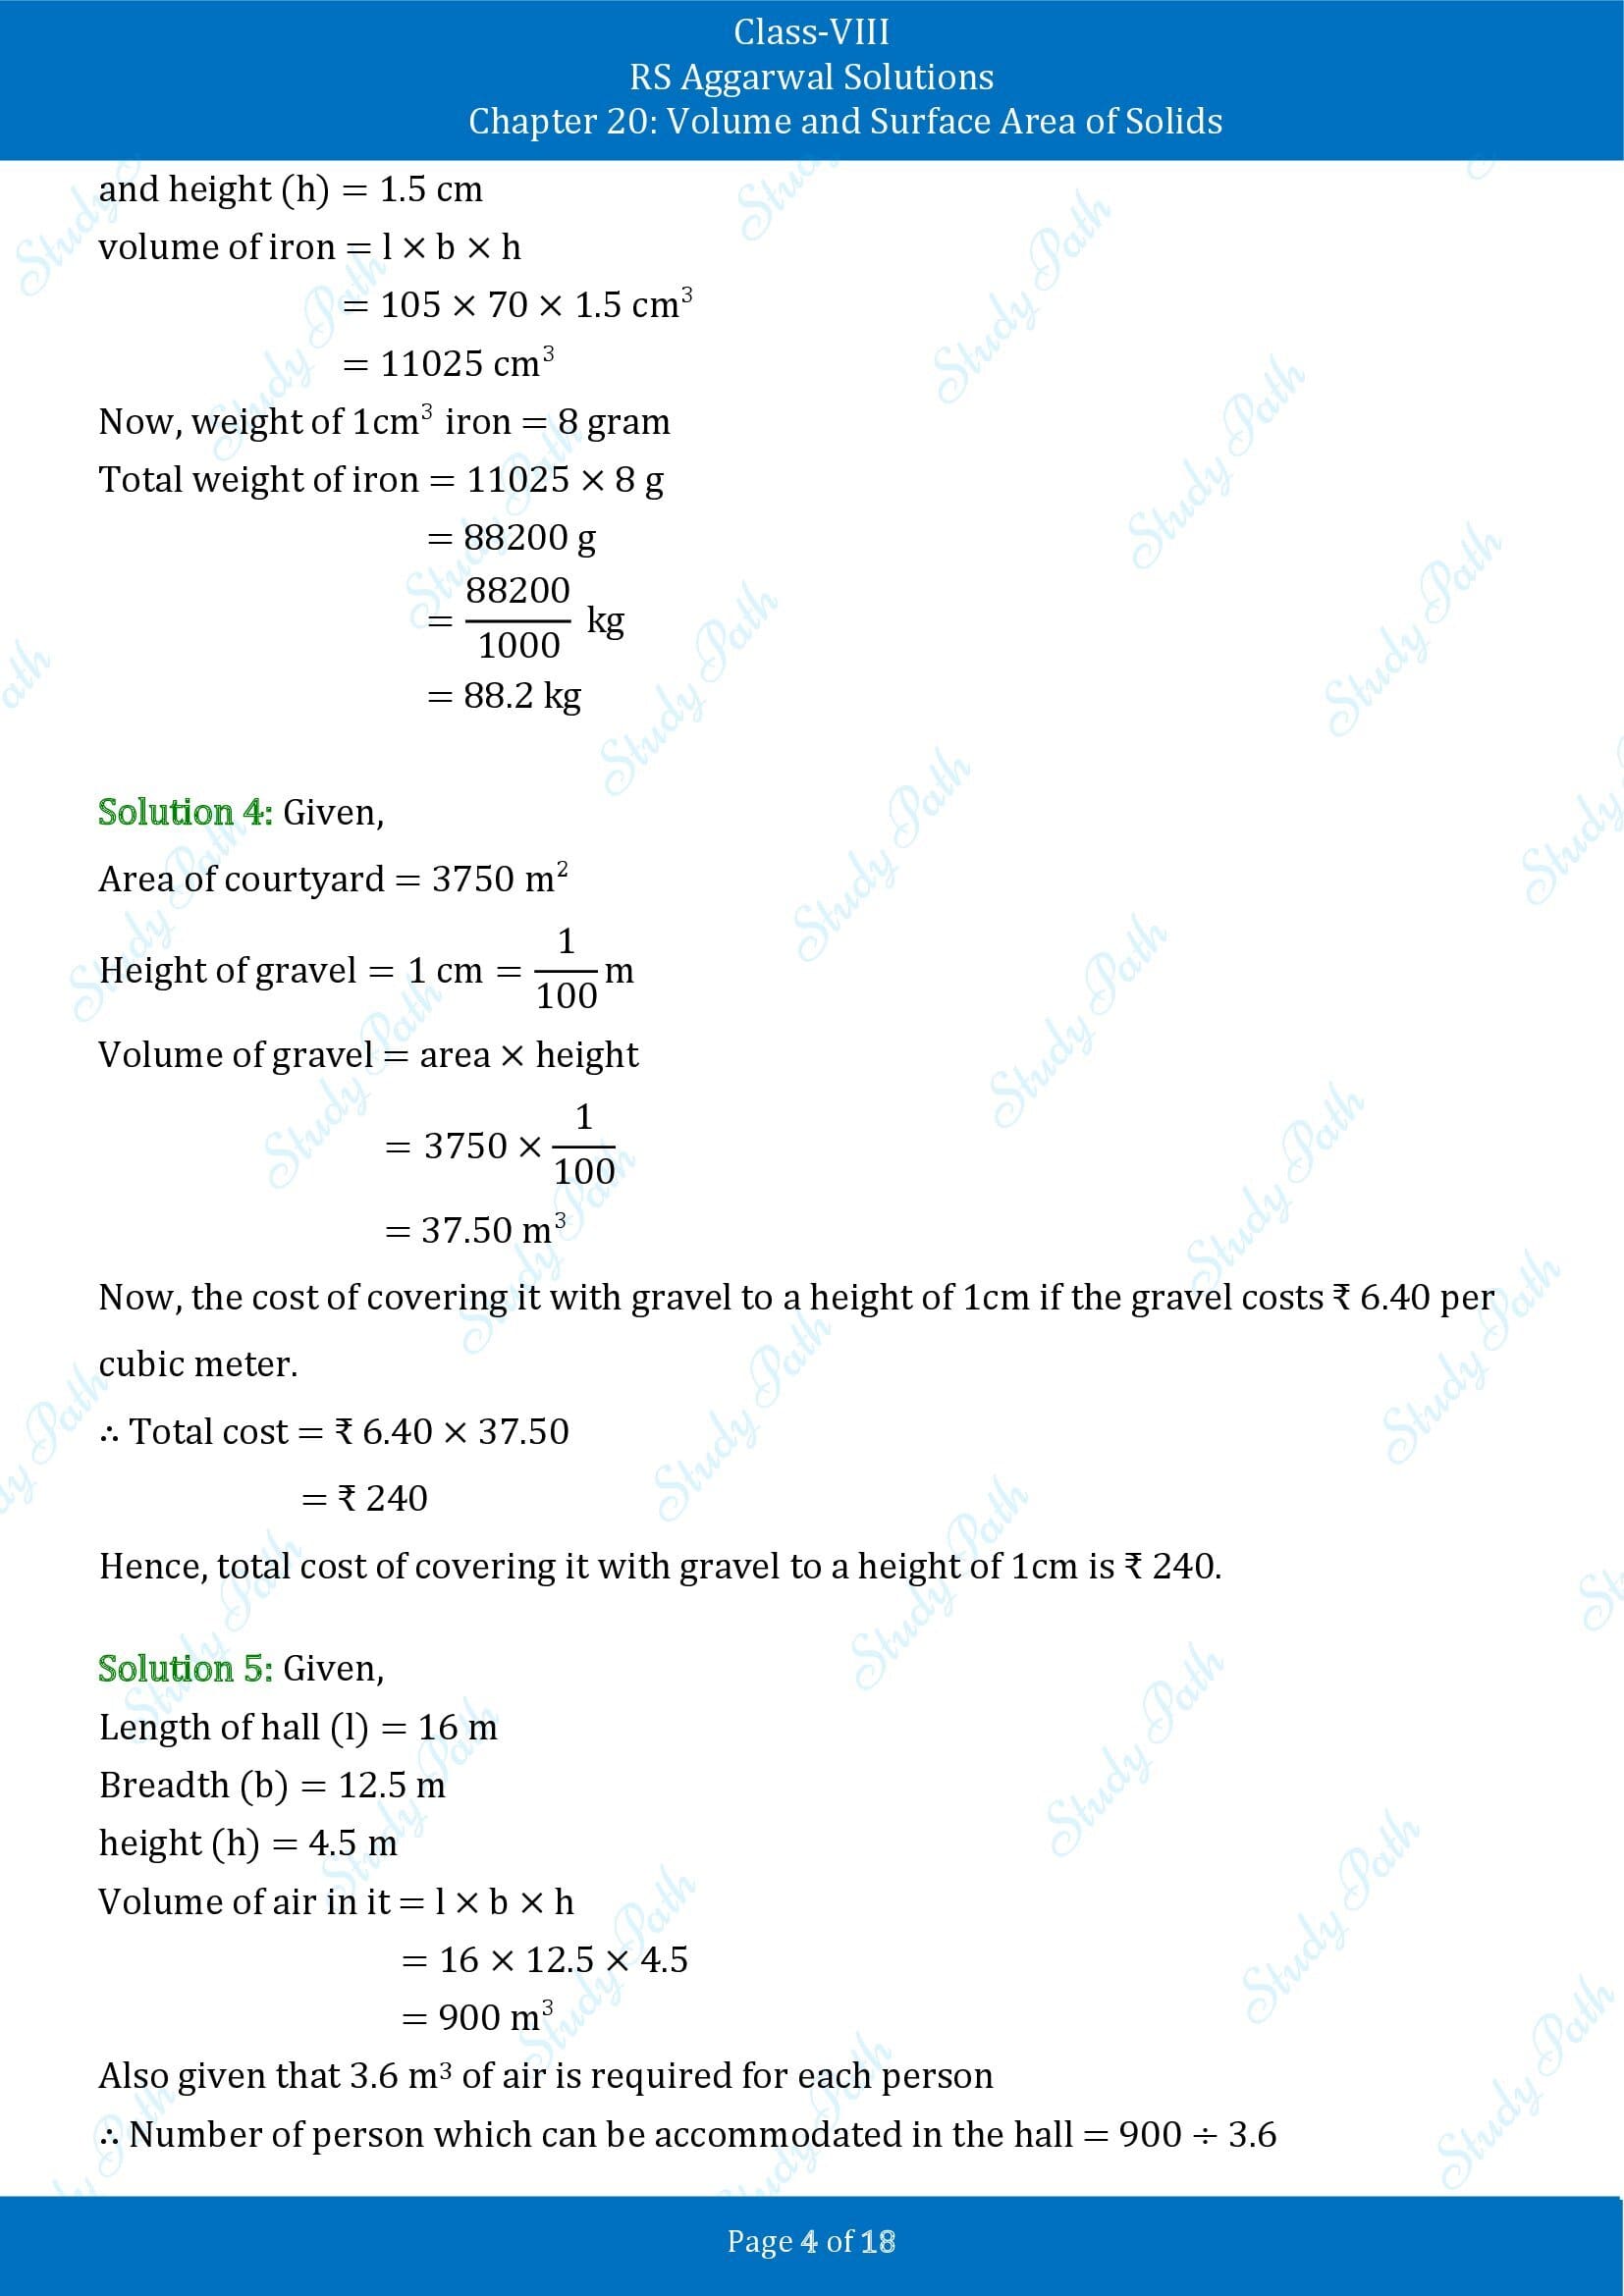 RS Aggarwal Solutions Class 8 Chapter 20 Volume and Surface Area of Solids Exercise 20A 00004